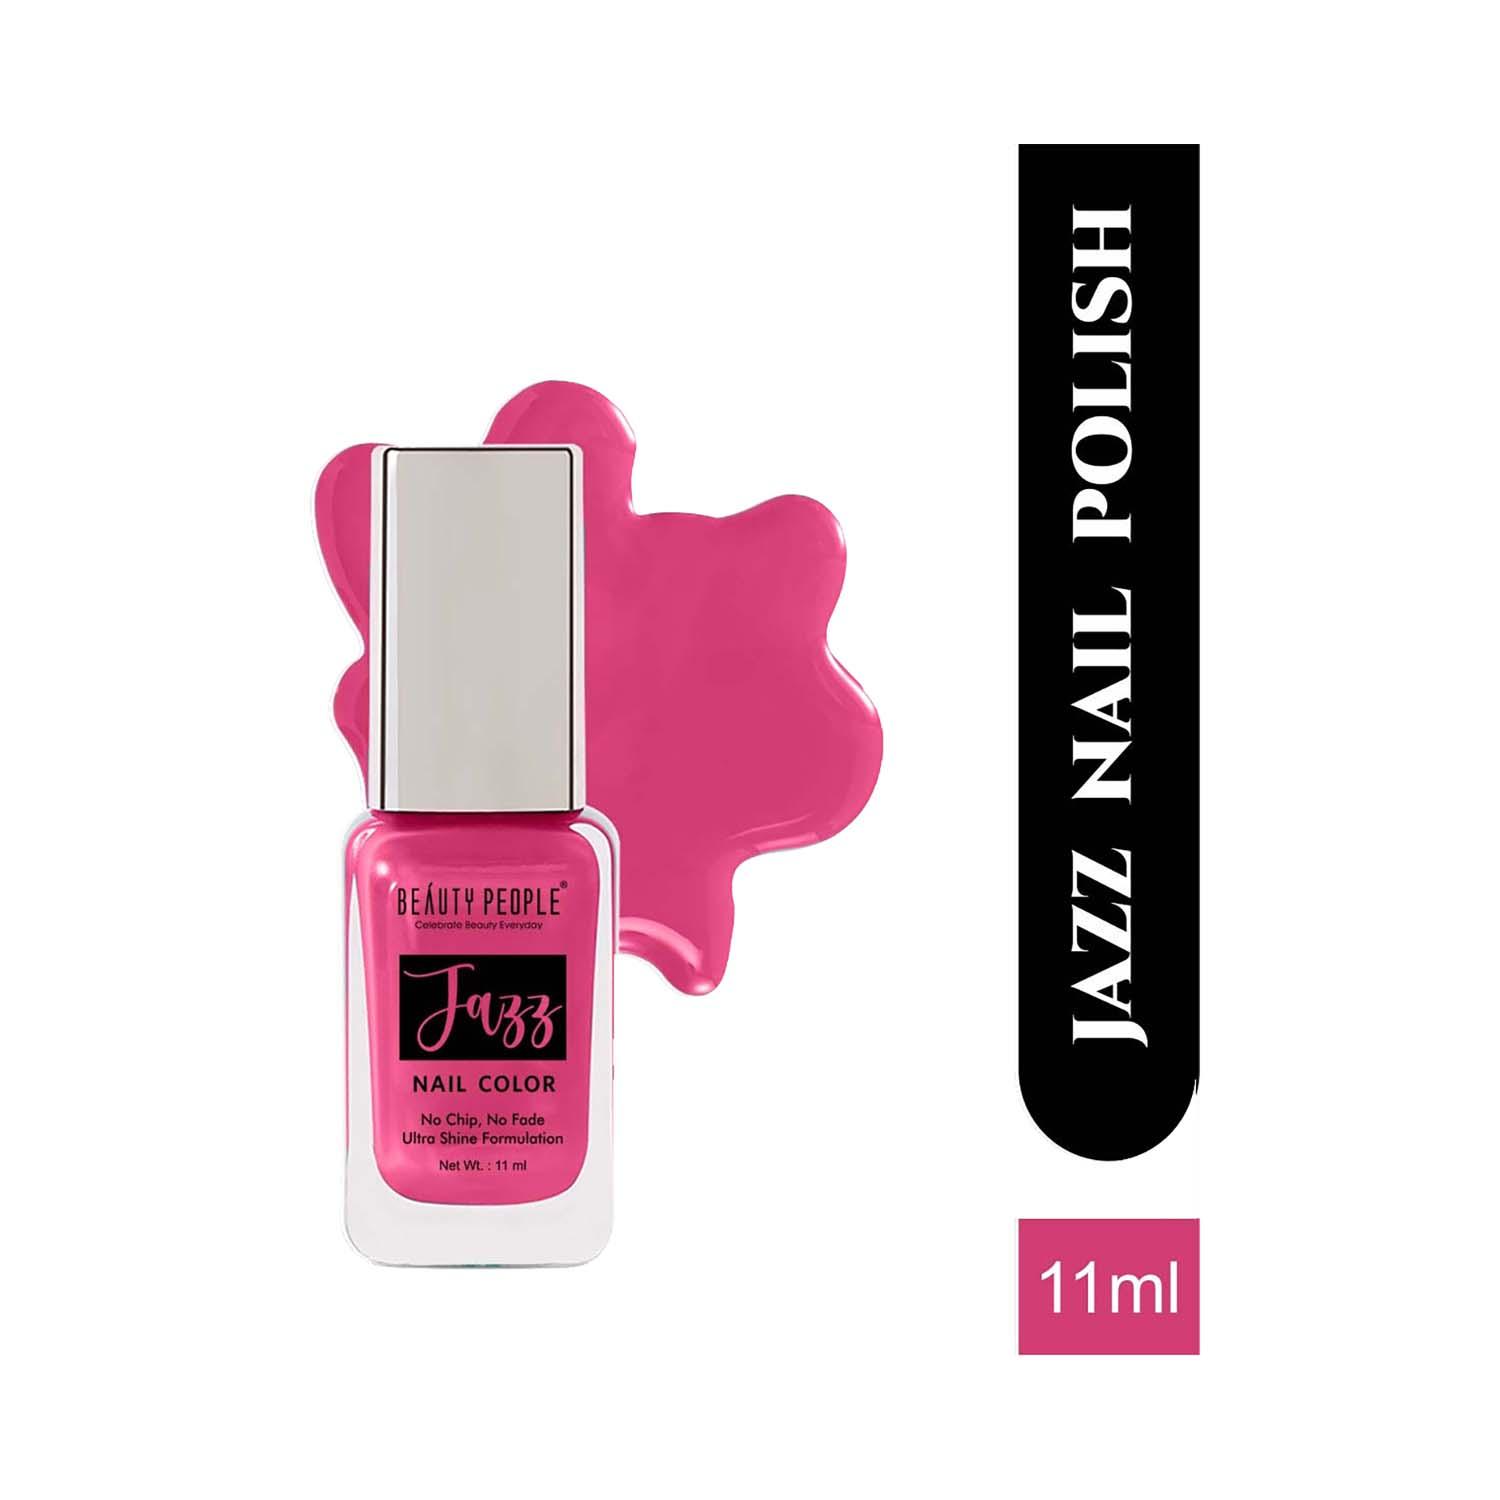 Beauty People | Beauty People Jazz Nail Color - 381 Profile Pink (11ml)